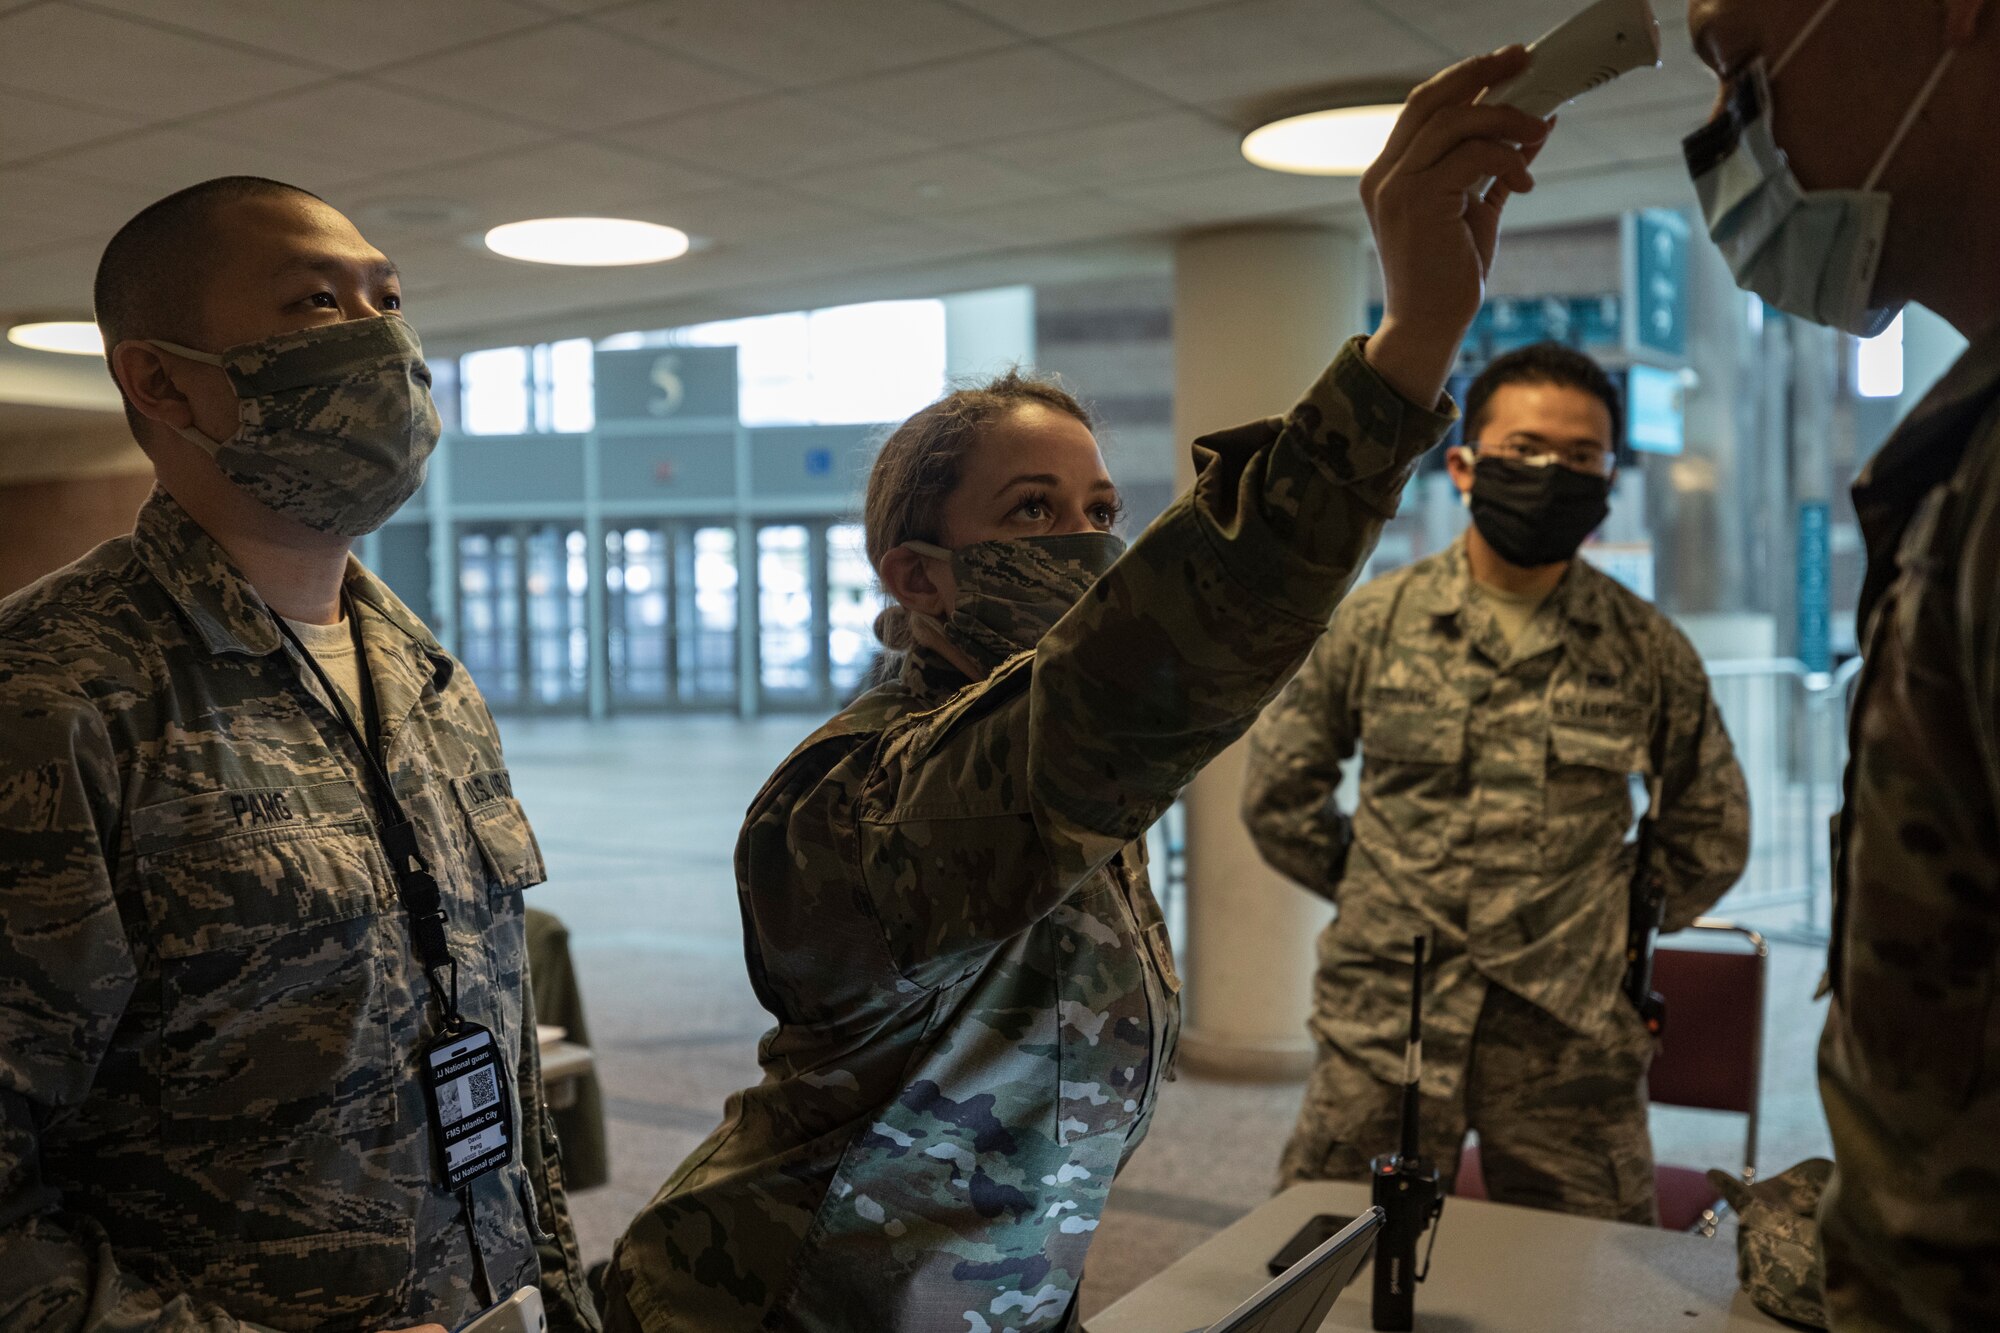 U.S. Air Force Airmen with the New Jersey Air National Guard’s 177th Fighter Wing screen Soldiers entering the Federal Medical Station at the Atlantic City Convention Center in Atlantic City, N.J., April 18, 2020. (U.S. Air National Guard photo by Master Sgt. Matt Hecht)